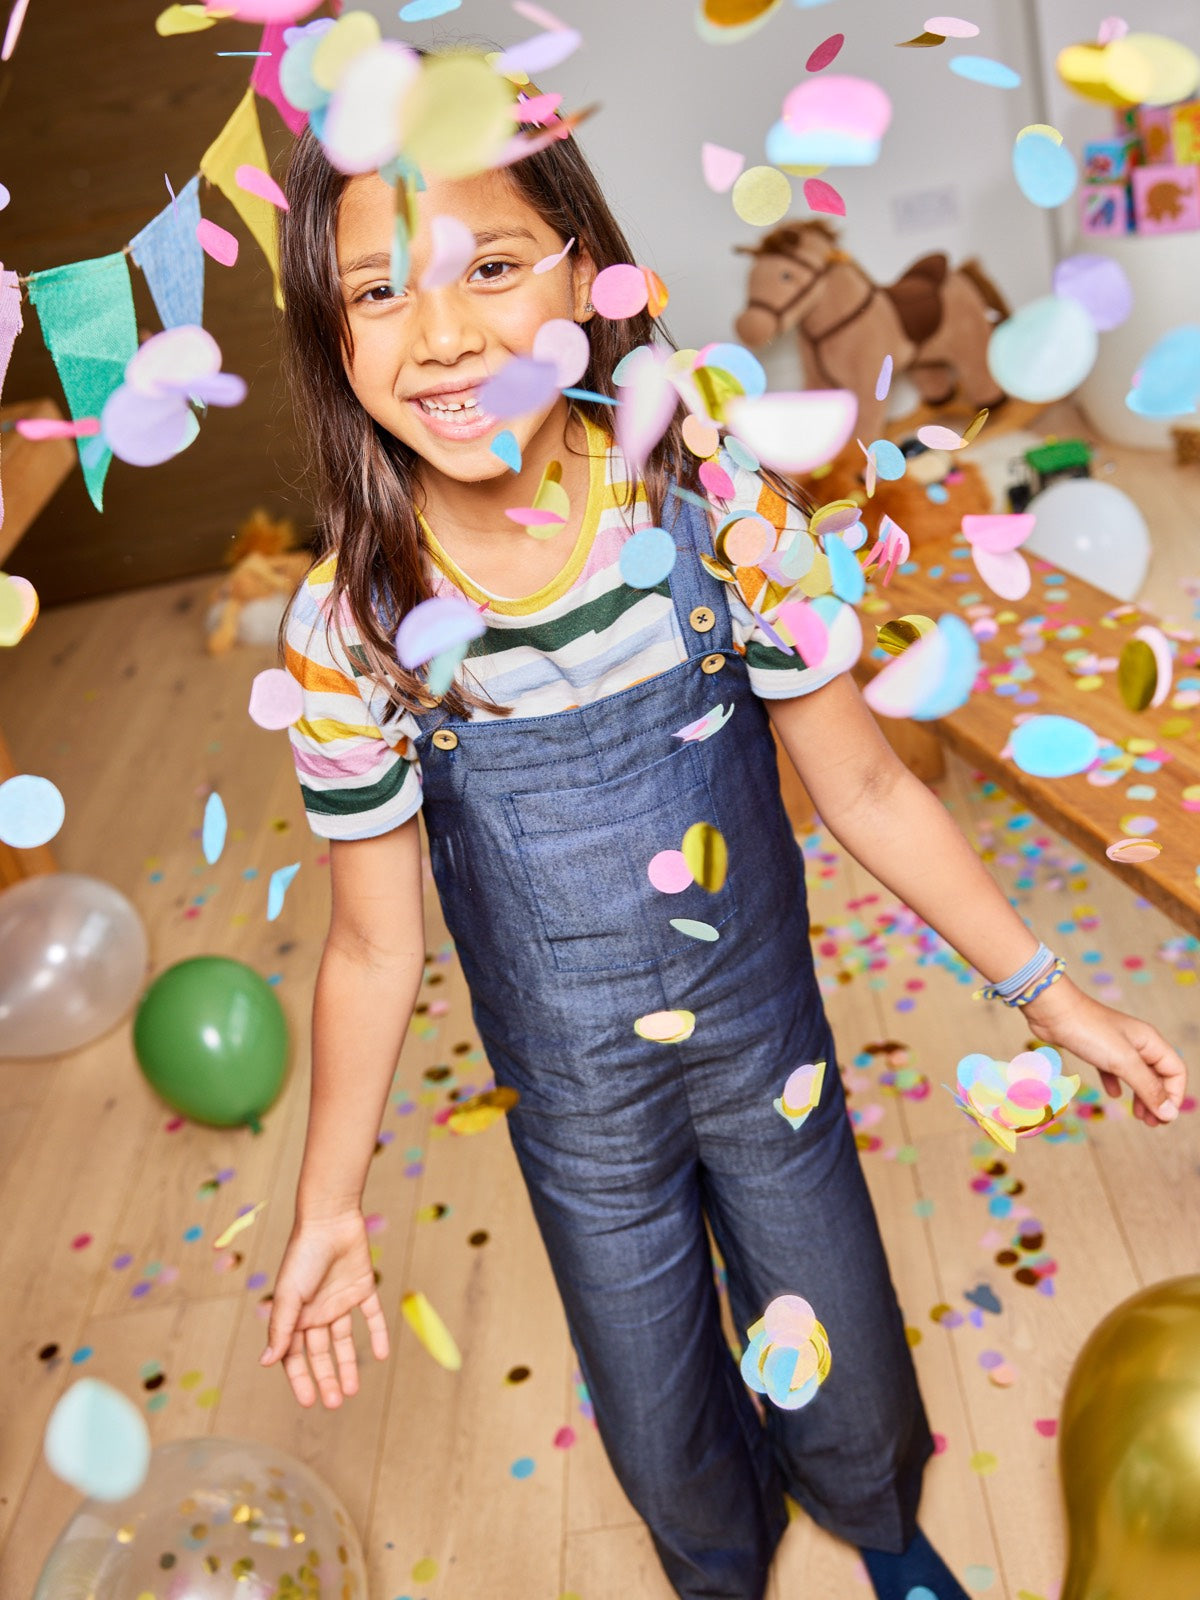 A child wearing the Sofia sustainable kids dungarees, pictured with falling confetti and balloons and smiling at the camera.